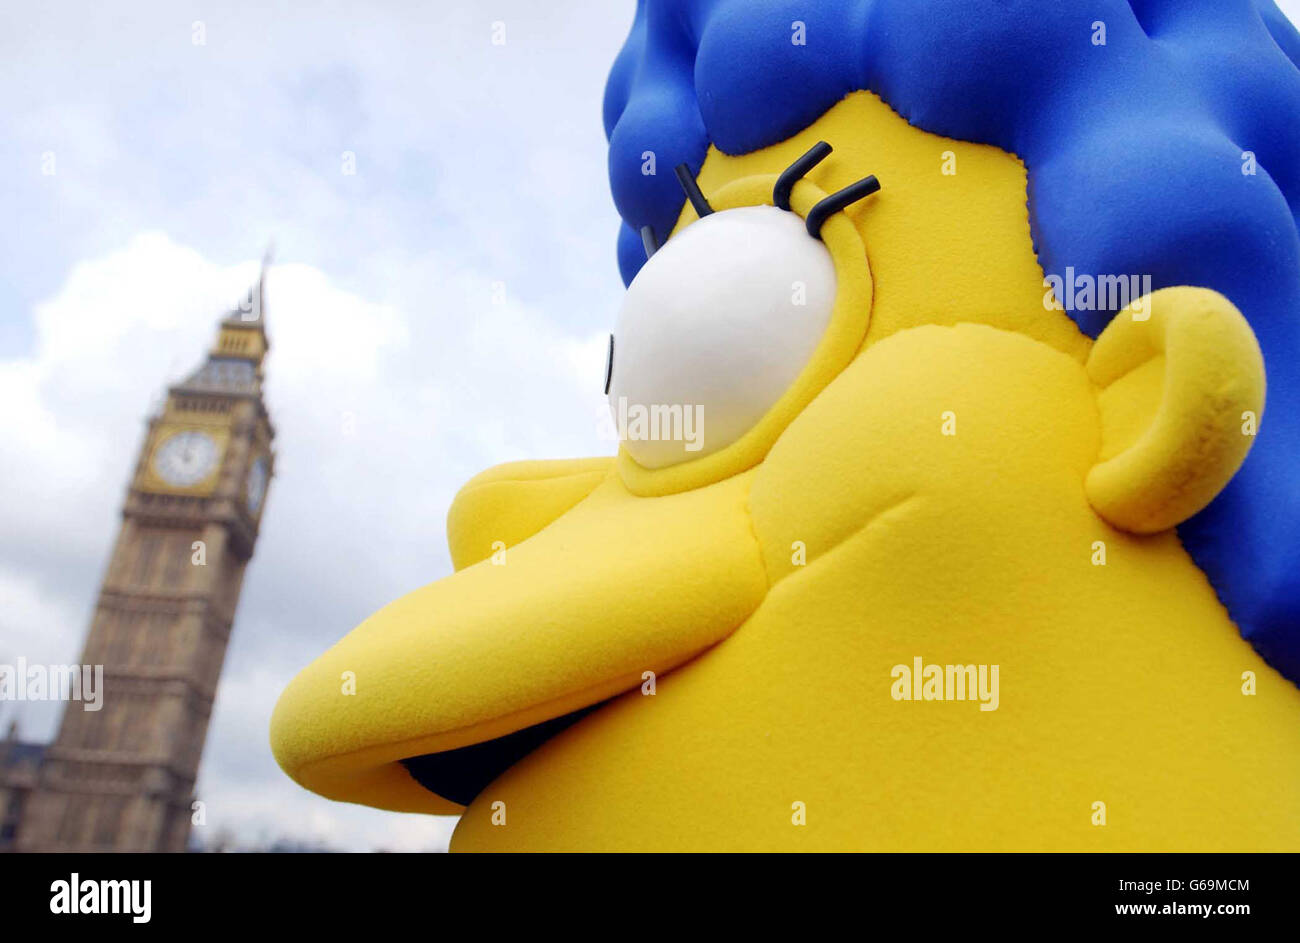 Marge Simpson during a photocall to celebrate the 300th episode of The Simpsons at Westminster Bridge in central London. Stock Photo